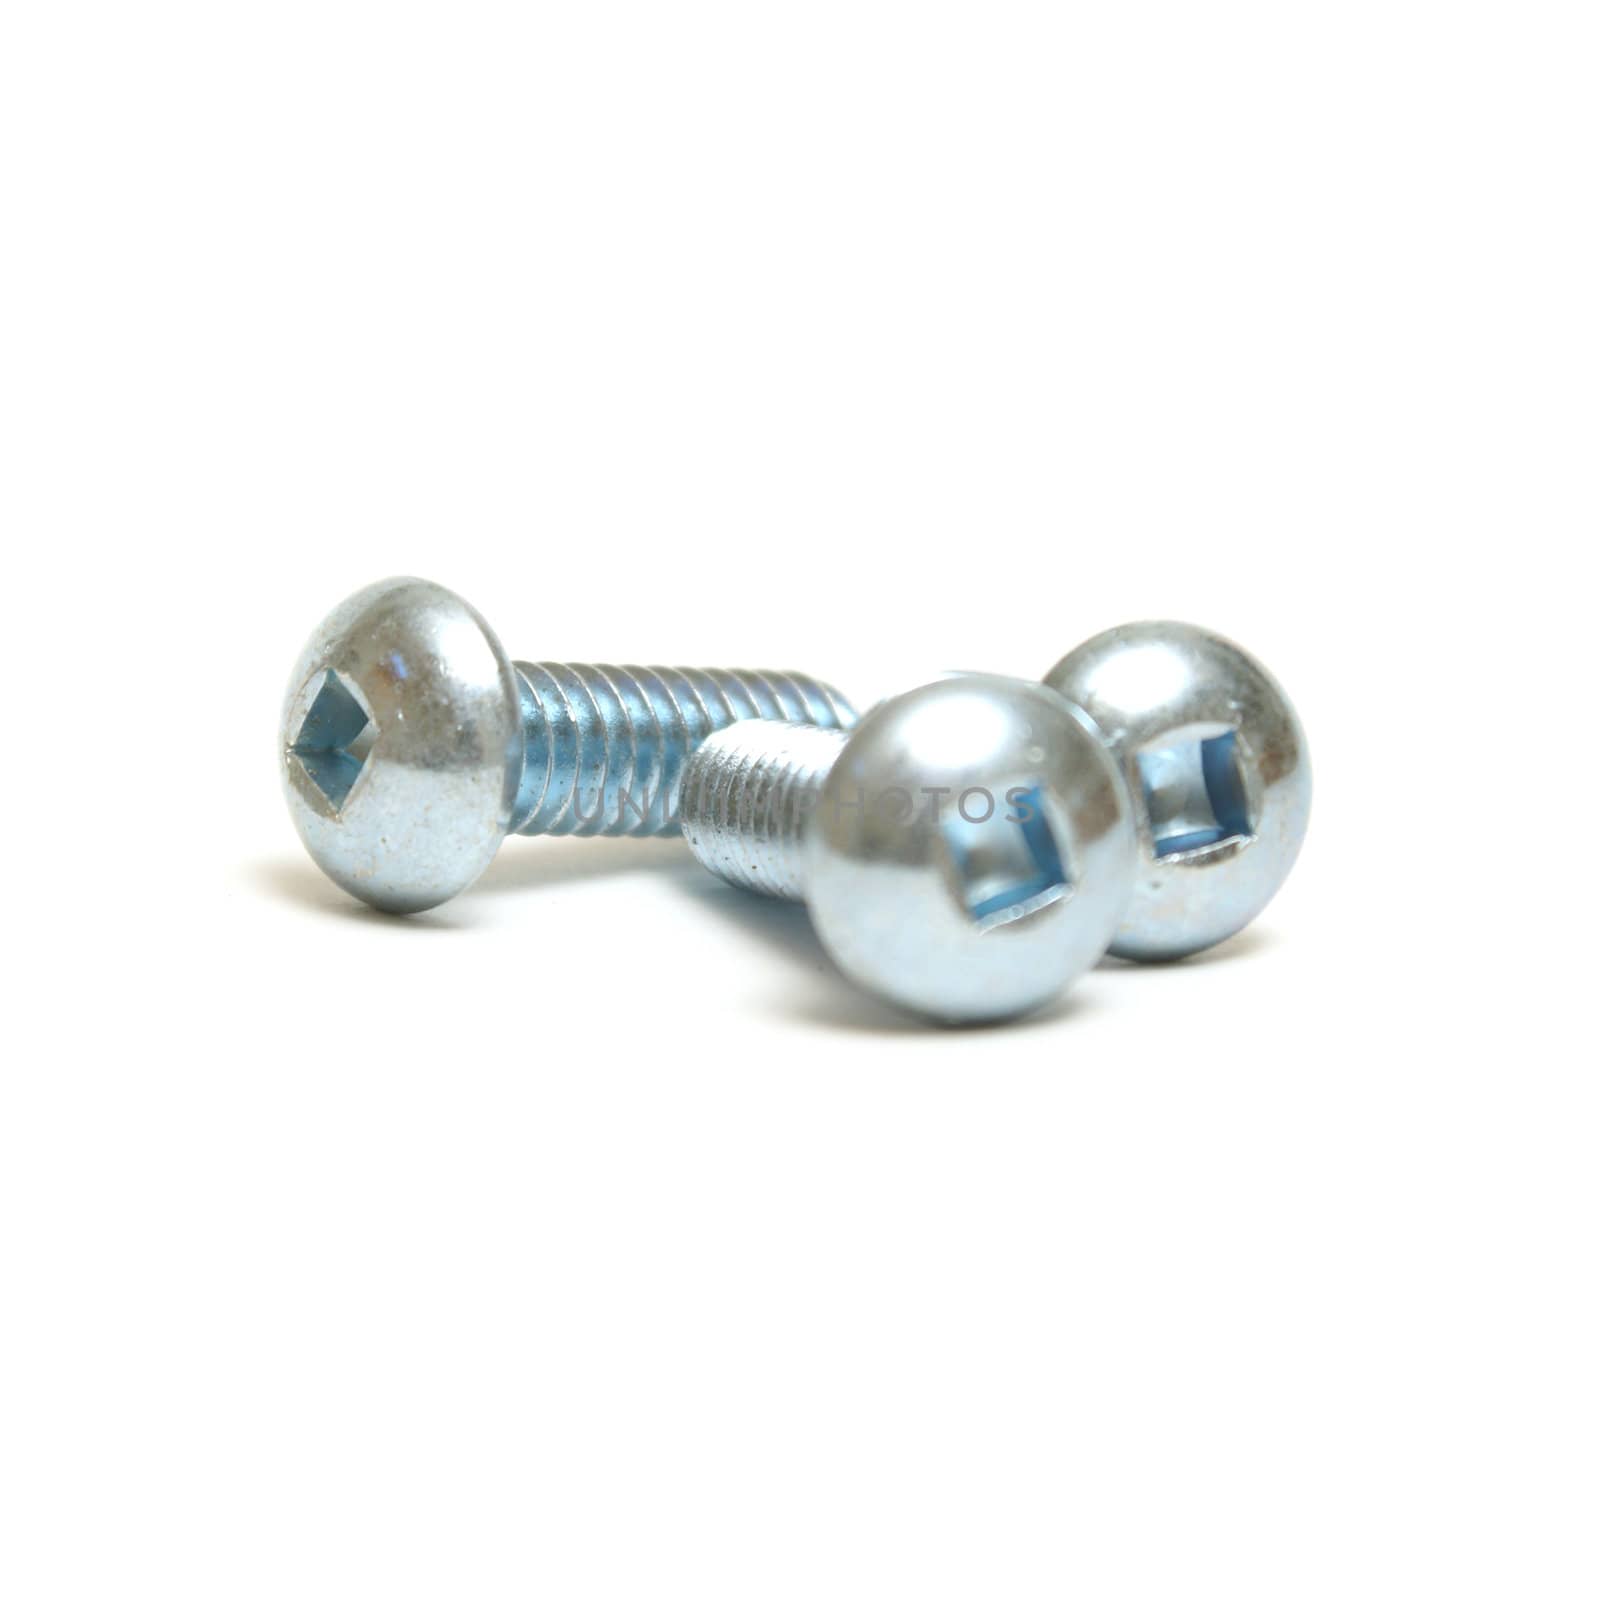 An isolated shot of a few screws.